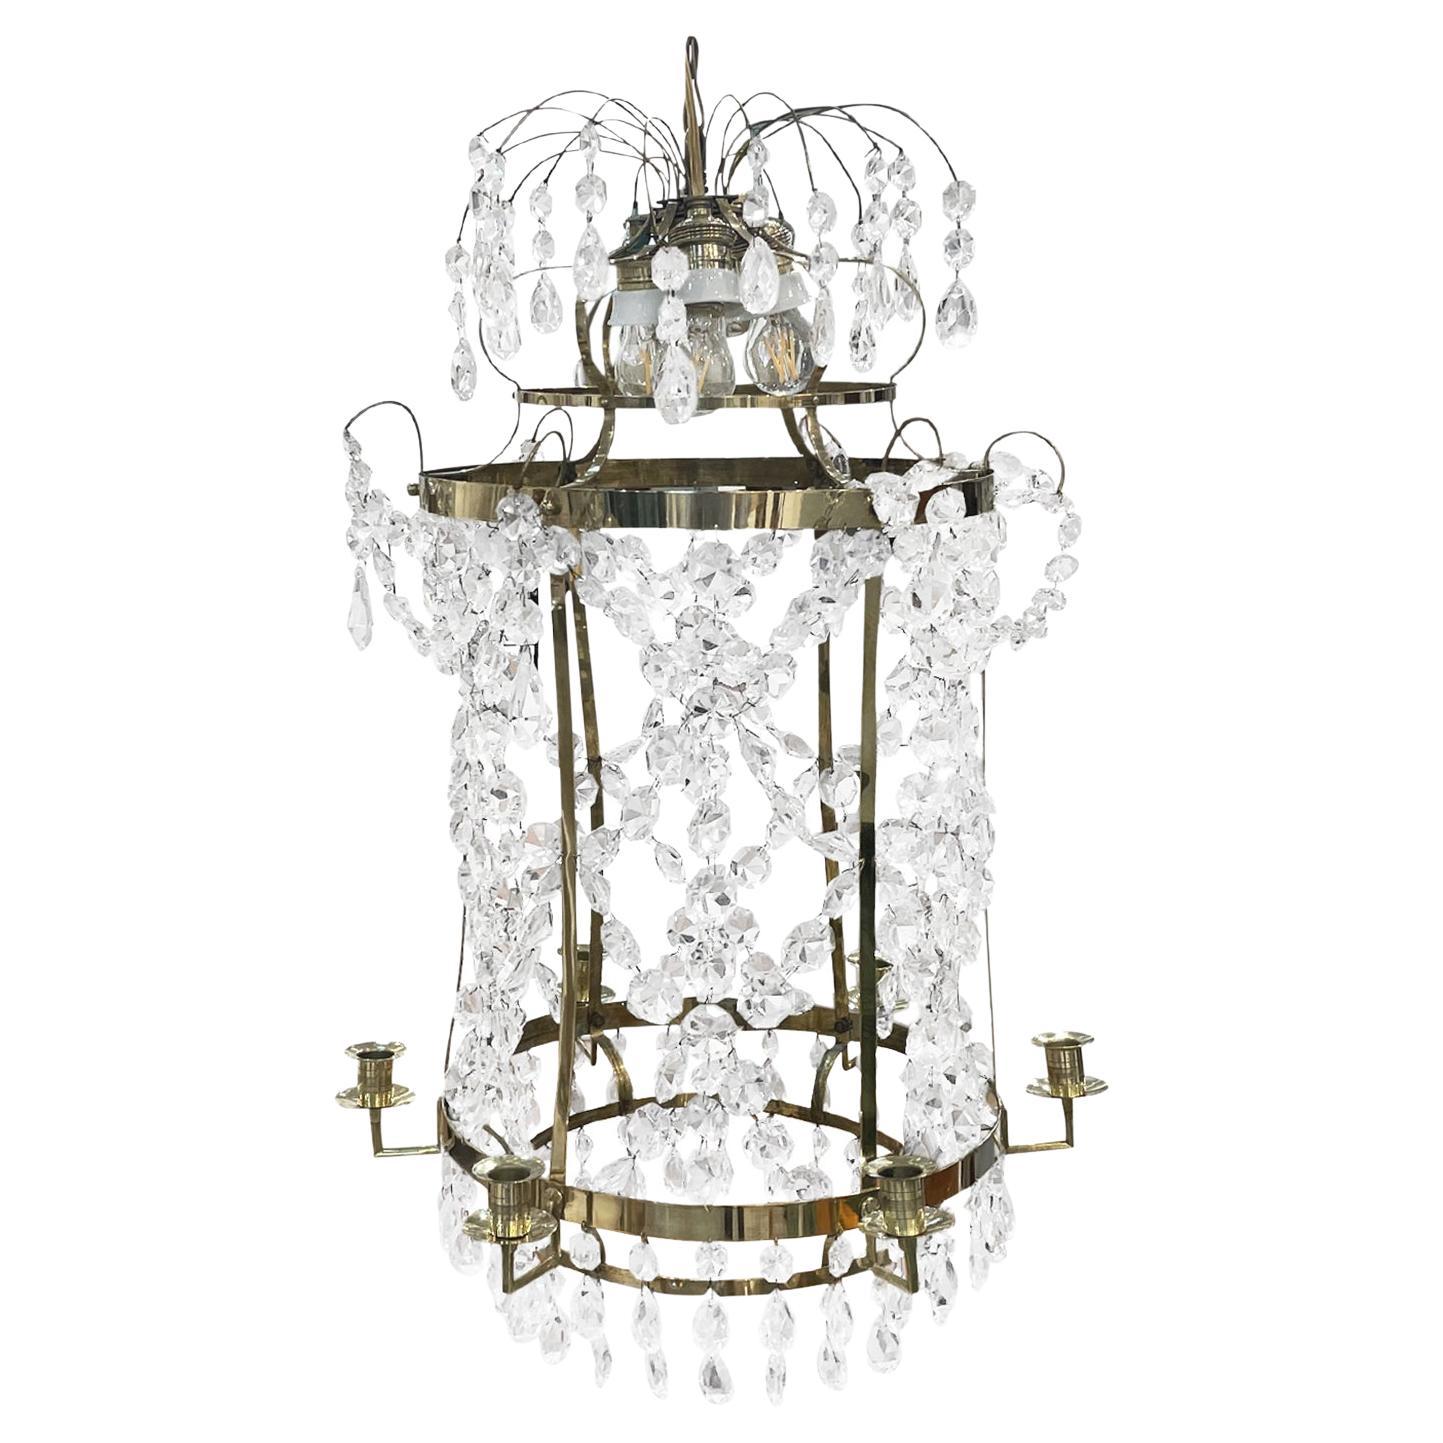 19th Century French Antique Empire Crystal Glass Chandelier, Parisian Candelabra